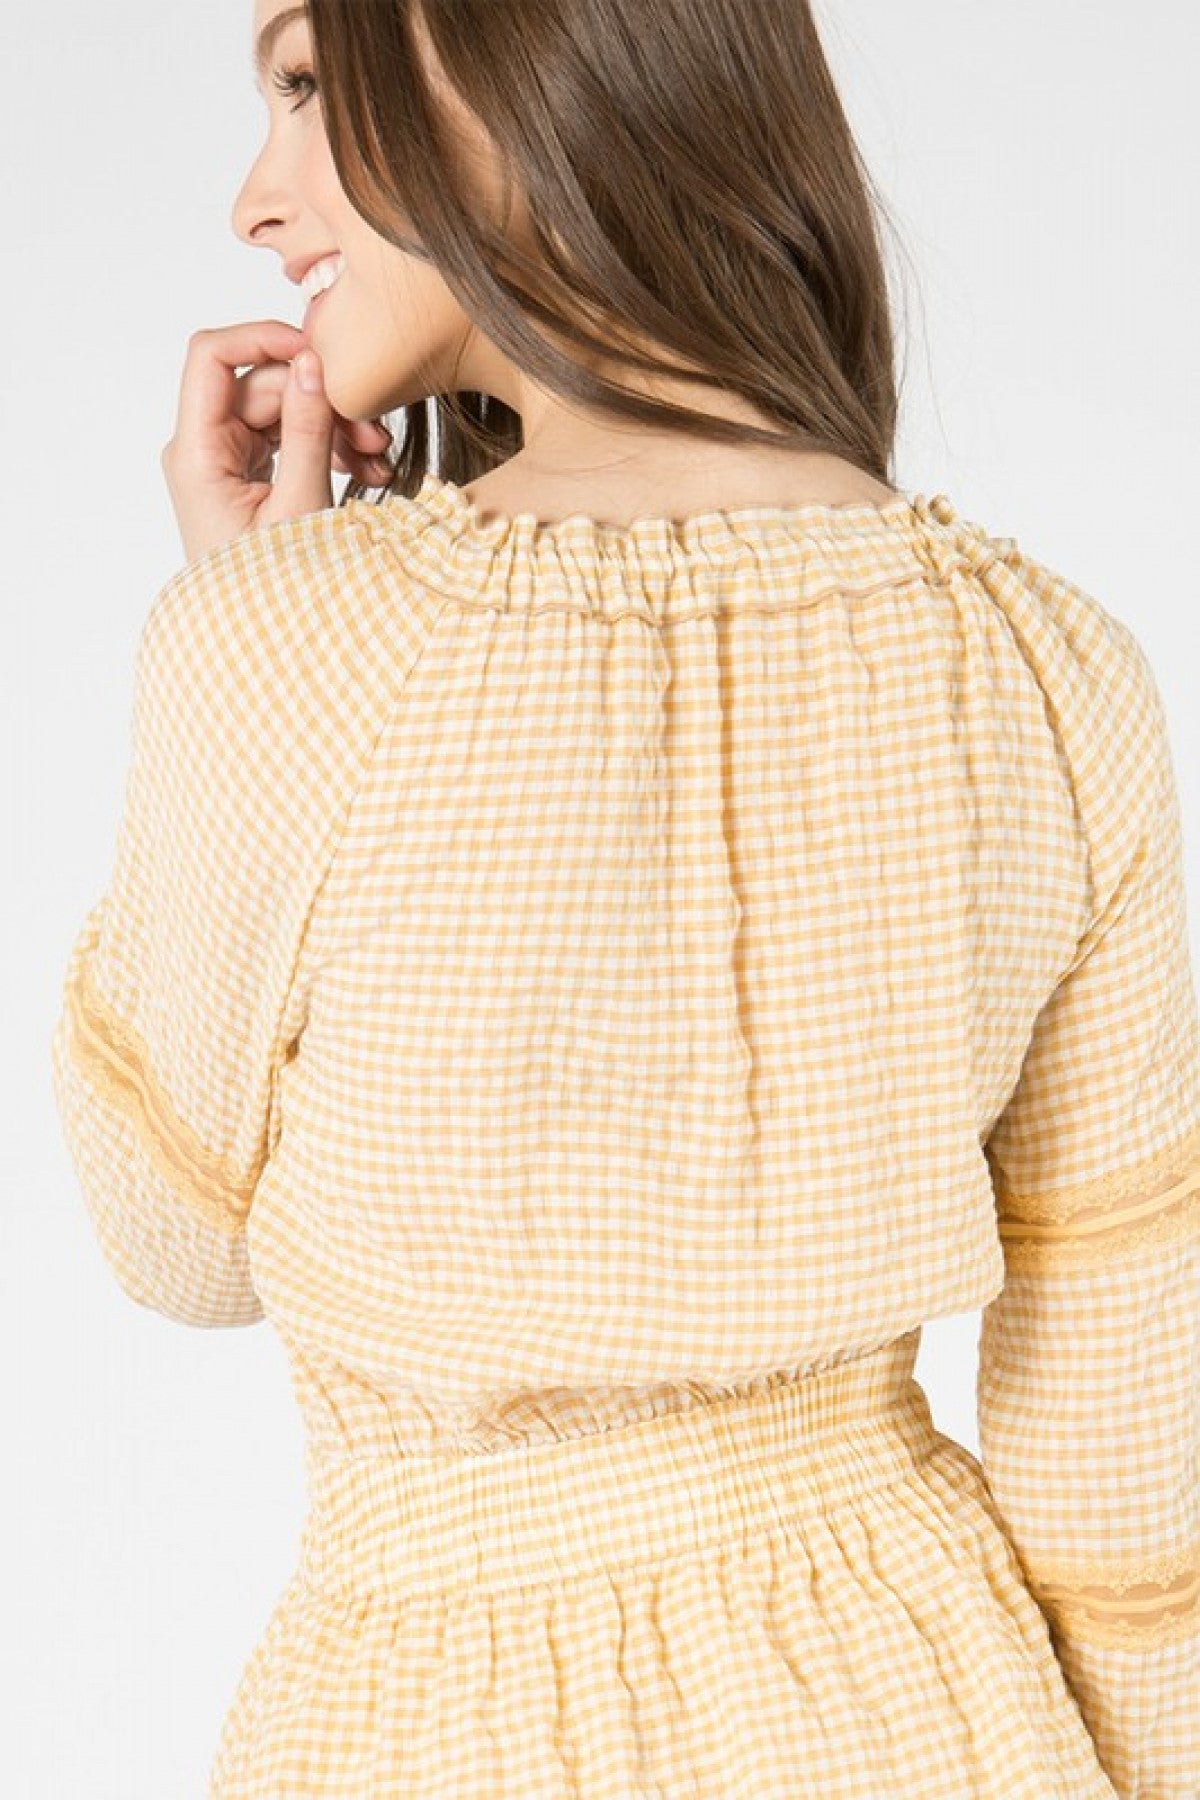 MUSTARD DRAW STRING NECK DETAIL STRETCH WAIST LONG SLEEVE MINI DRESS (NOW $3.00 ONLY!)